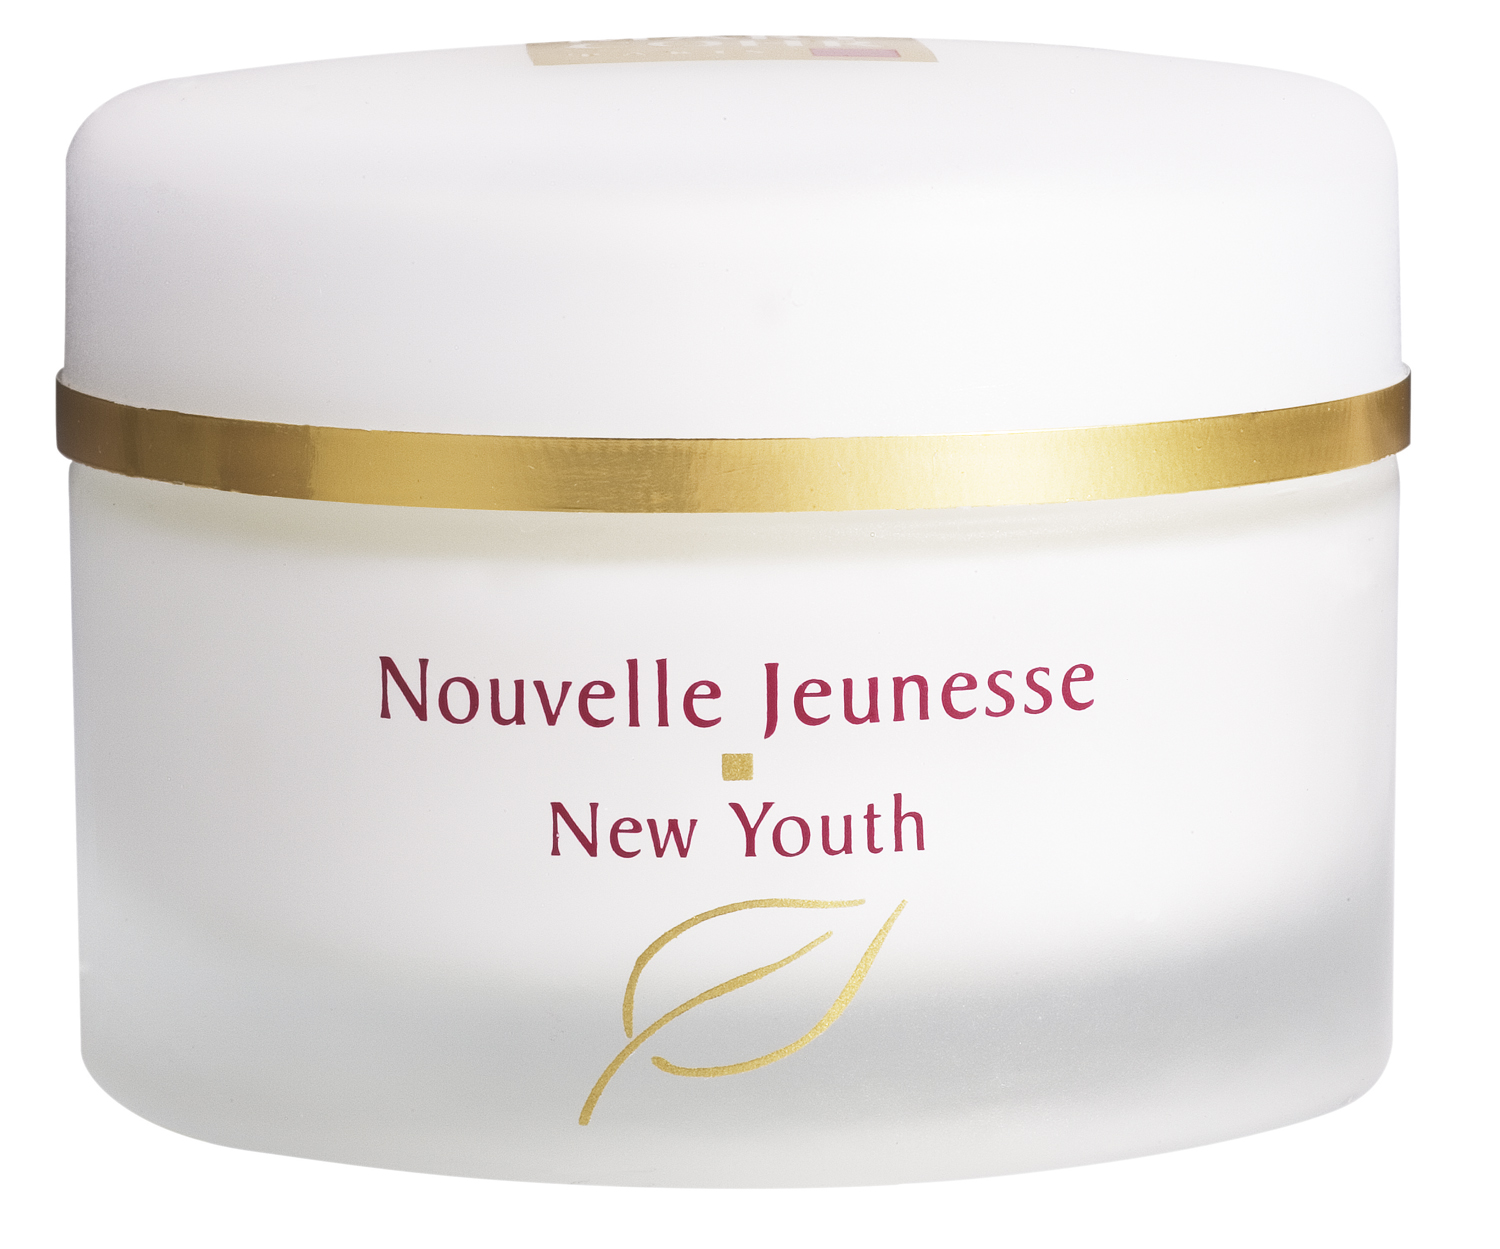 Enriched New Youth Cream